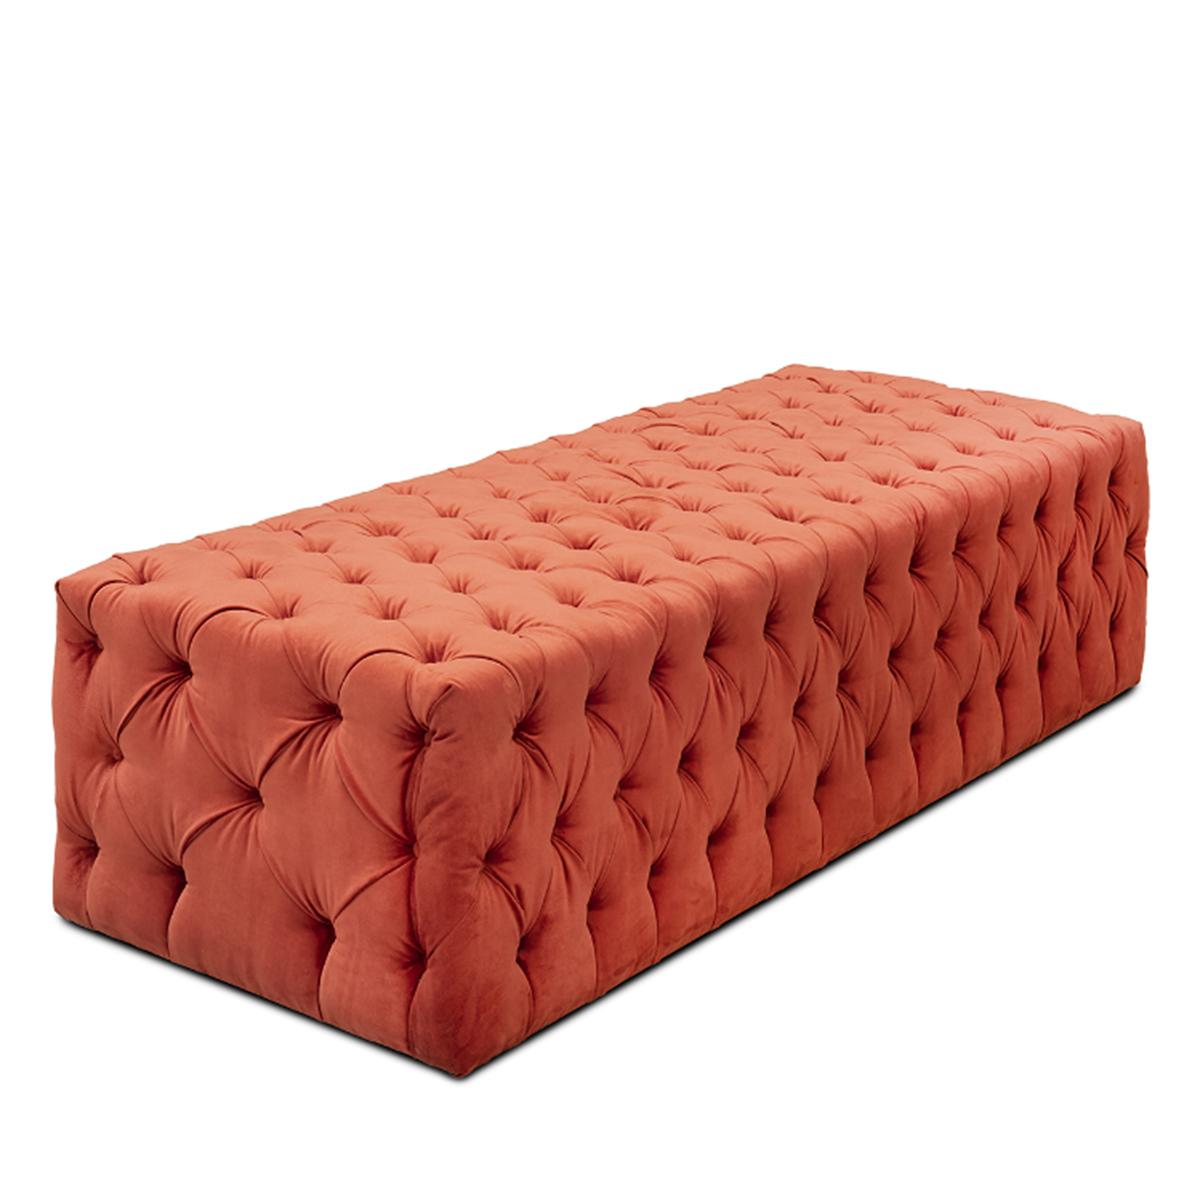 Ottoman Genio orange coral with solid wood structure.
Upholstered capitonated ottoman covered with
orange-coral velvet fabric.